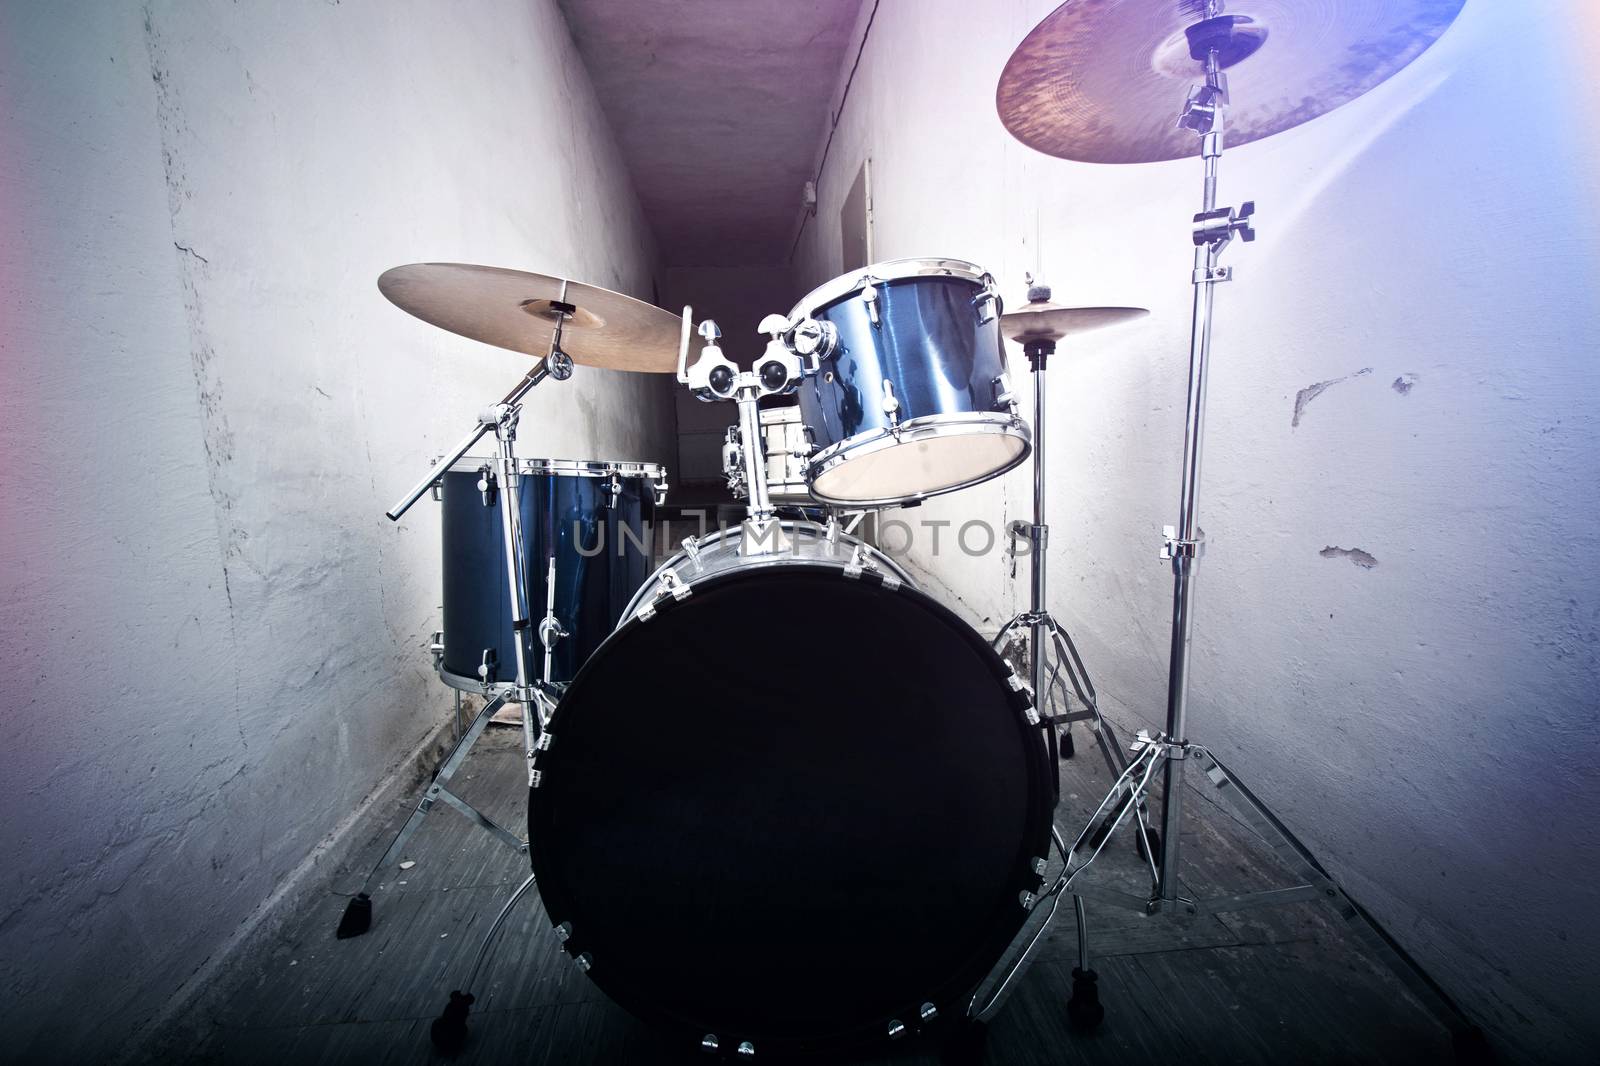 Drums conceptual image. Picture of drums and drumsticks lying on snare drum. Retro vintage instagram picture.